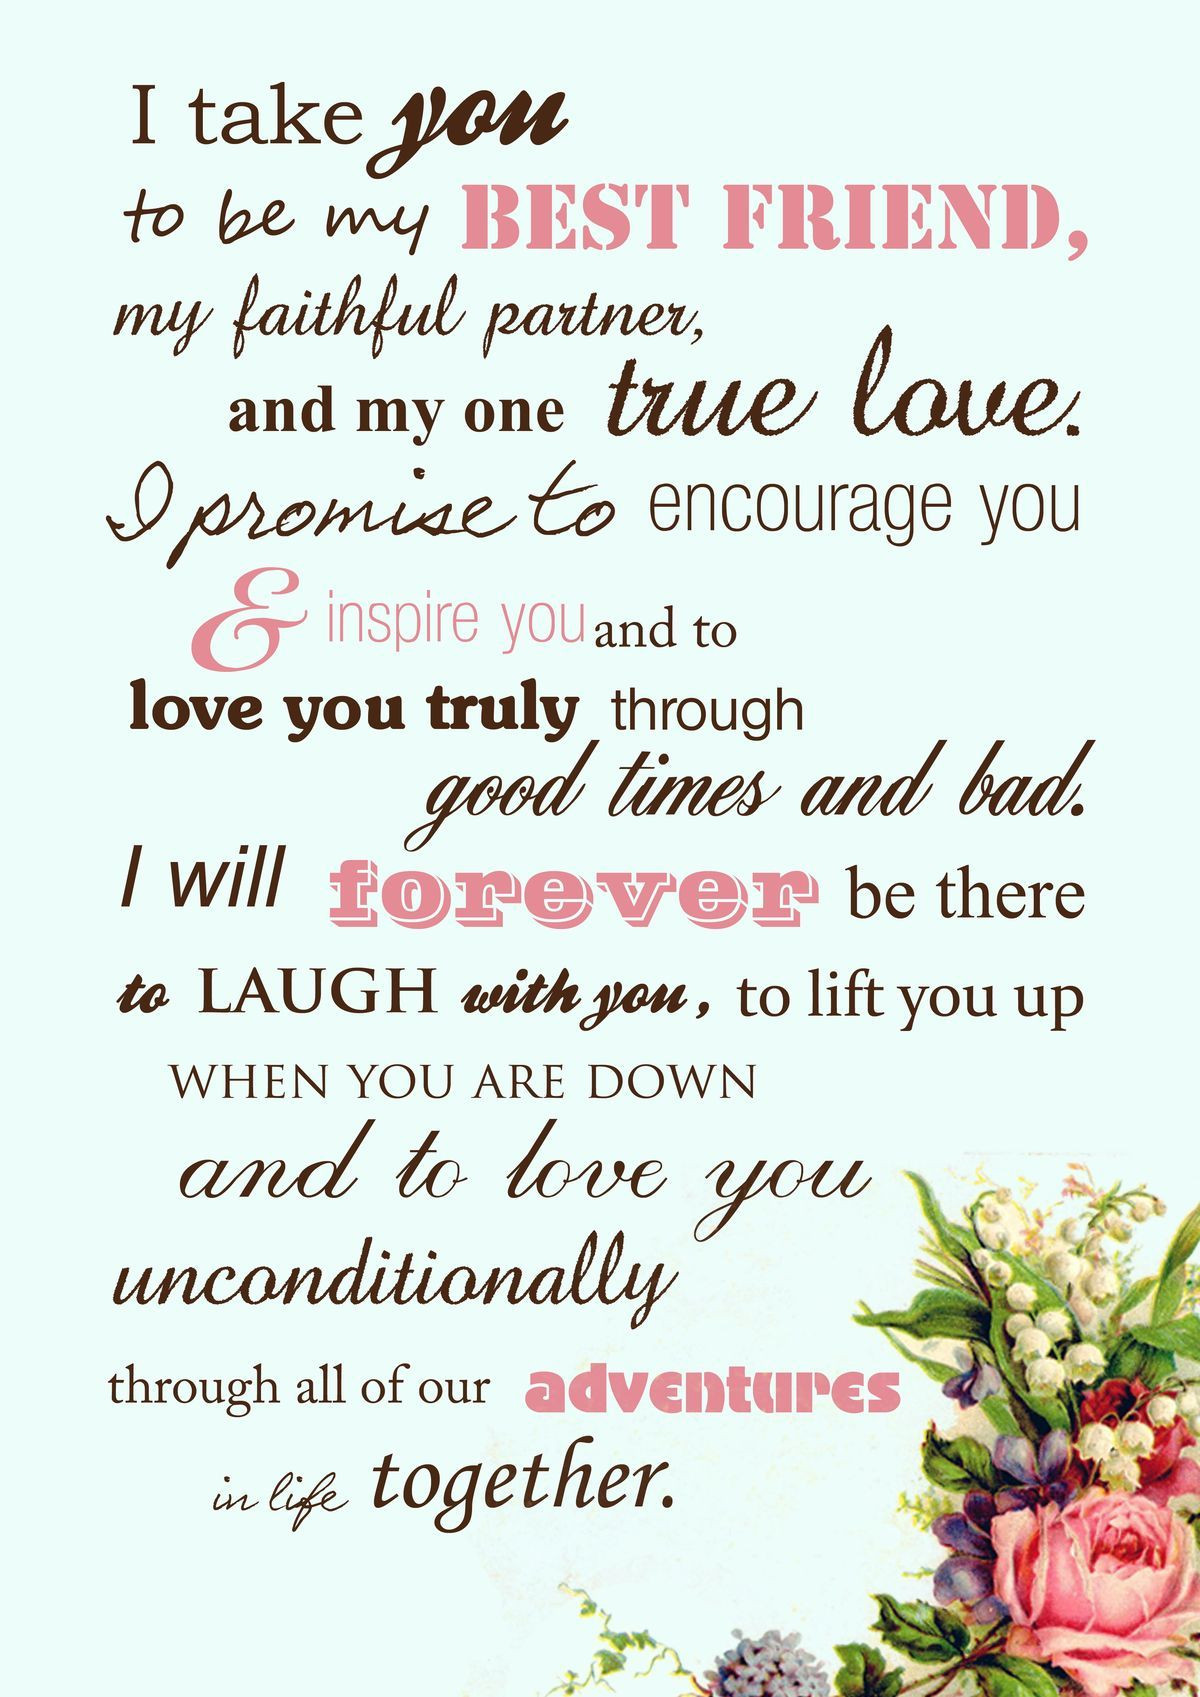 Funny Wedding Vows Examples
 traditional wedding vows best photos